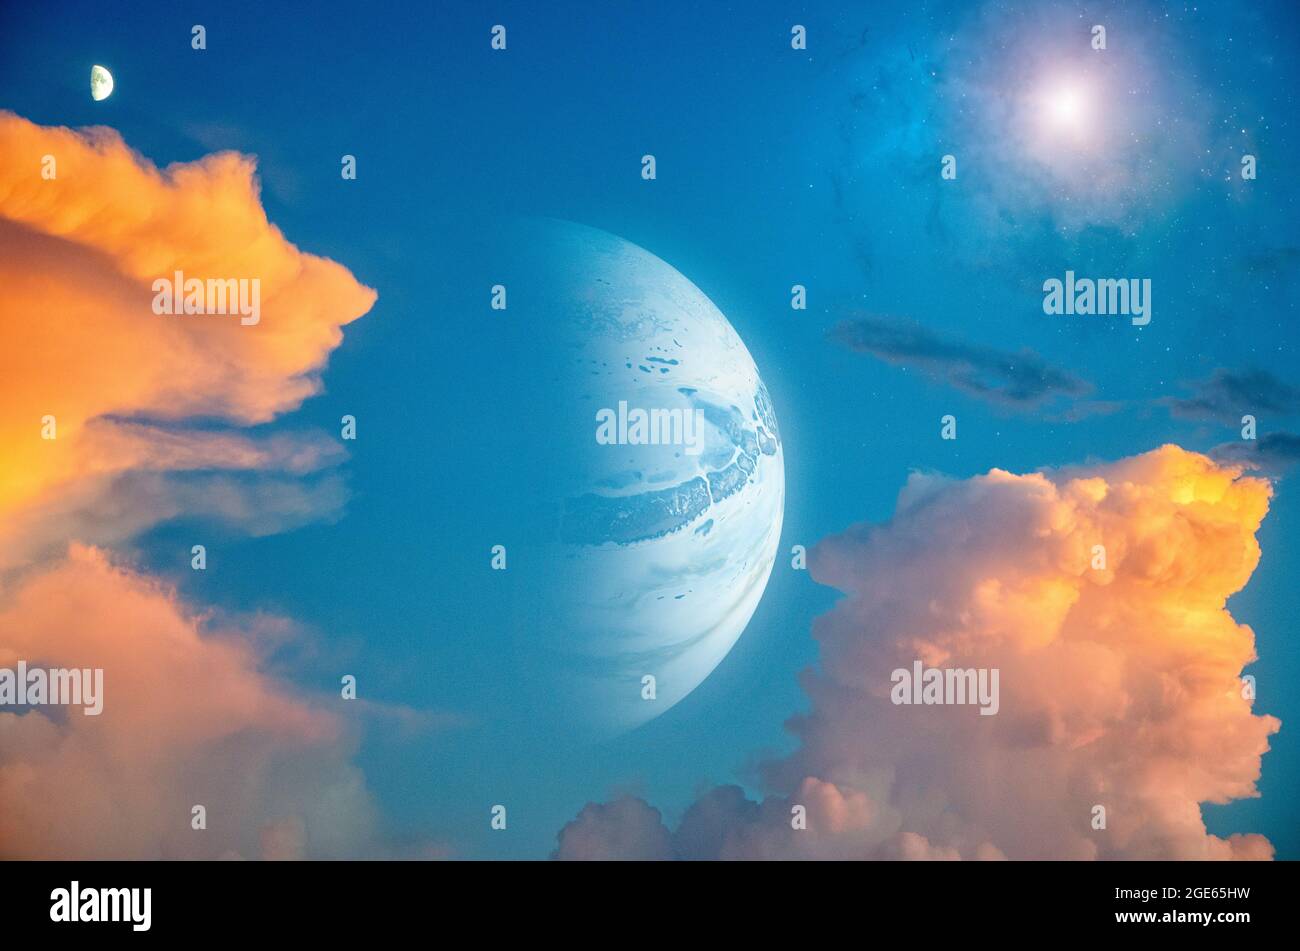 Sci-fi landscape. A planet seen from one of his moons. Exoplanet. Clouds and atmosphere of a moon next to a planet Stock Photo